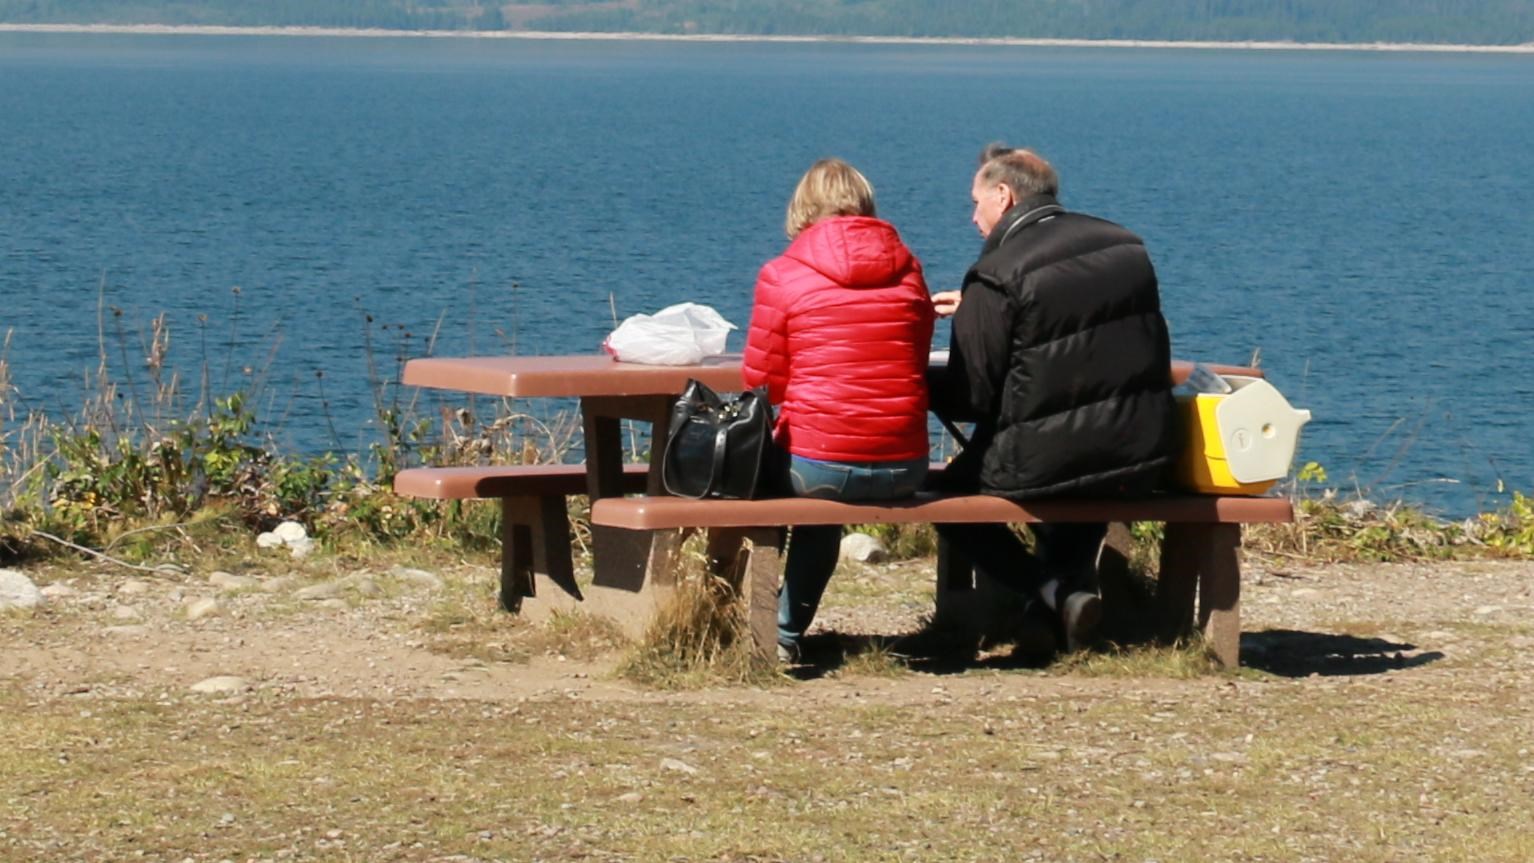 People sitting at picnic tables with a view of a blue lake and mountains in the background.